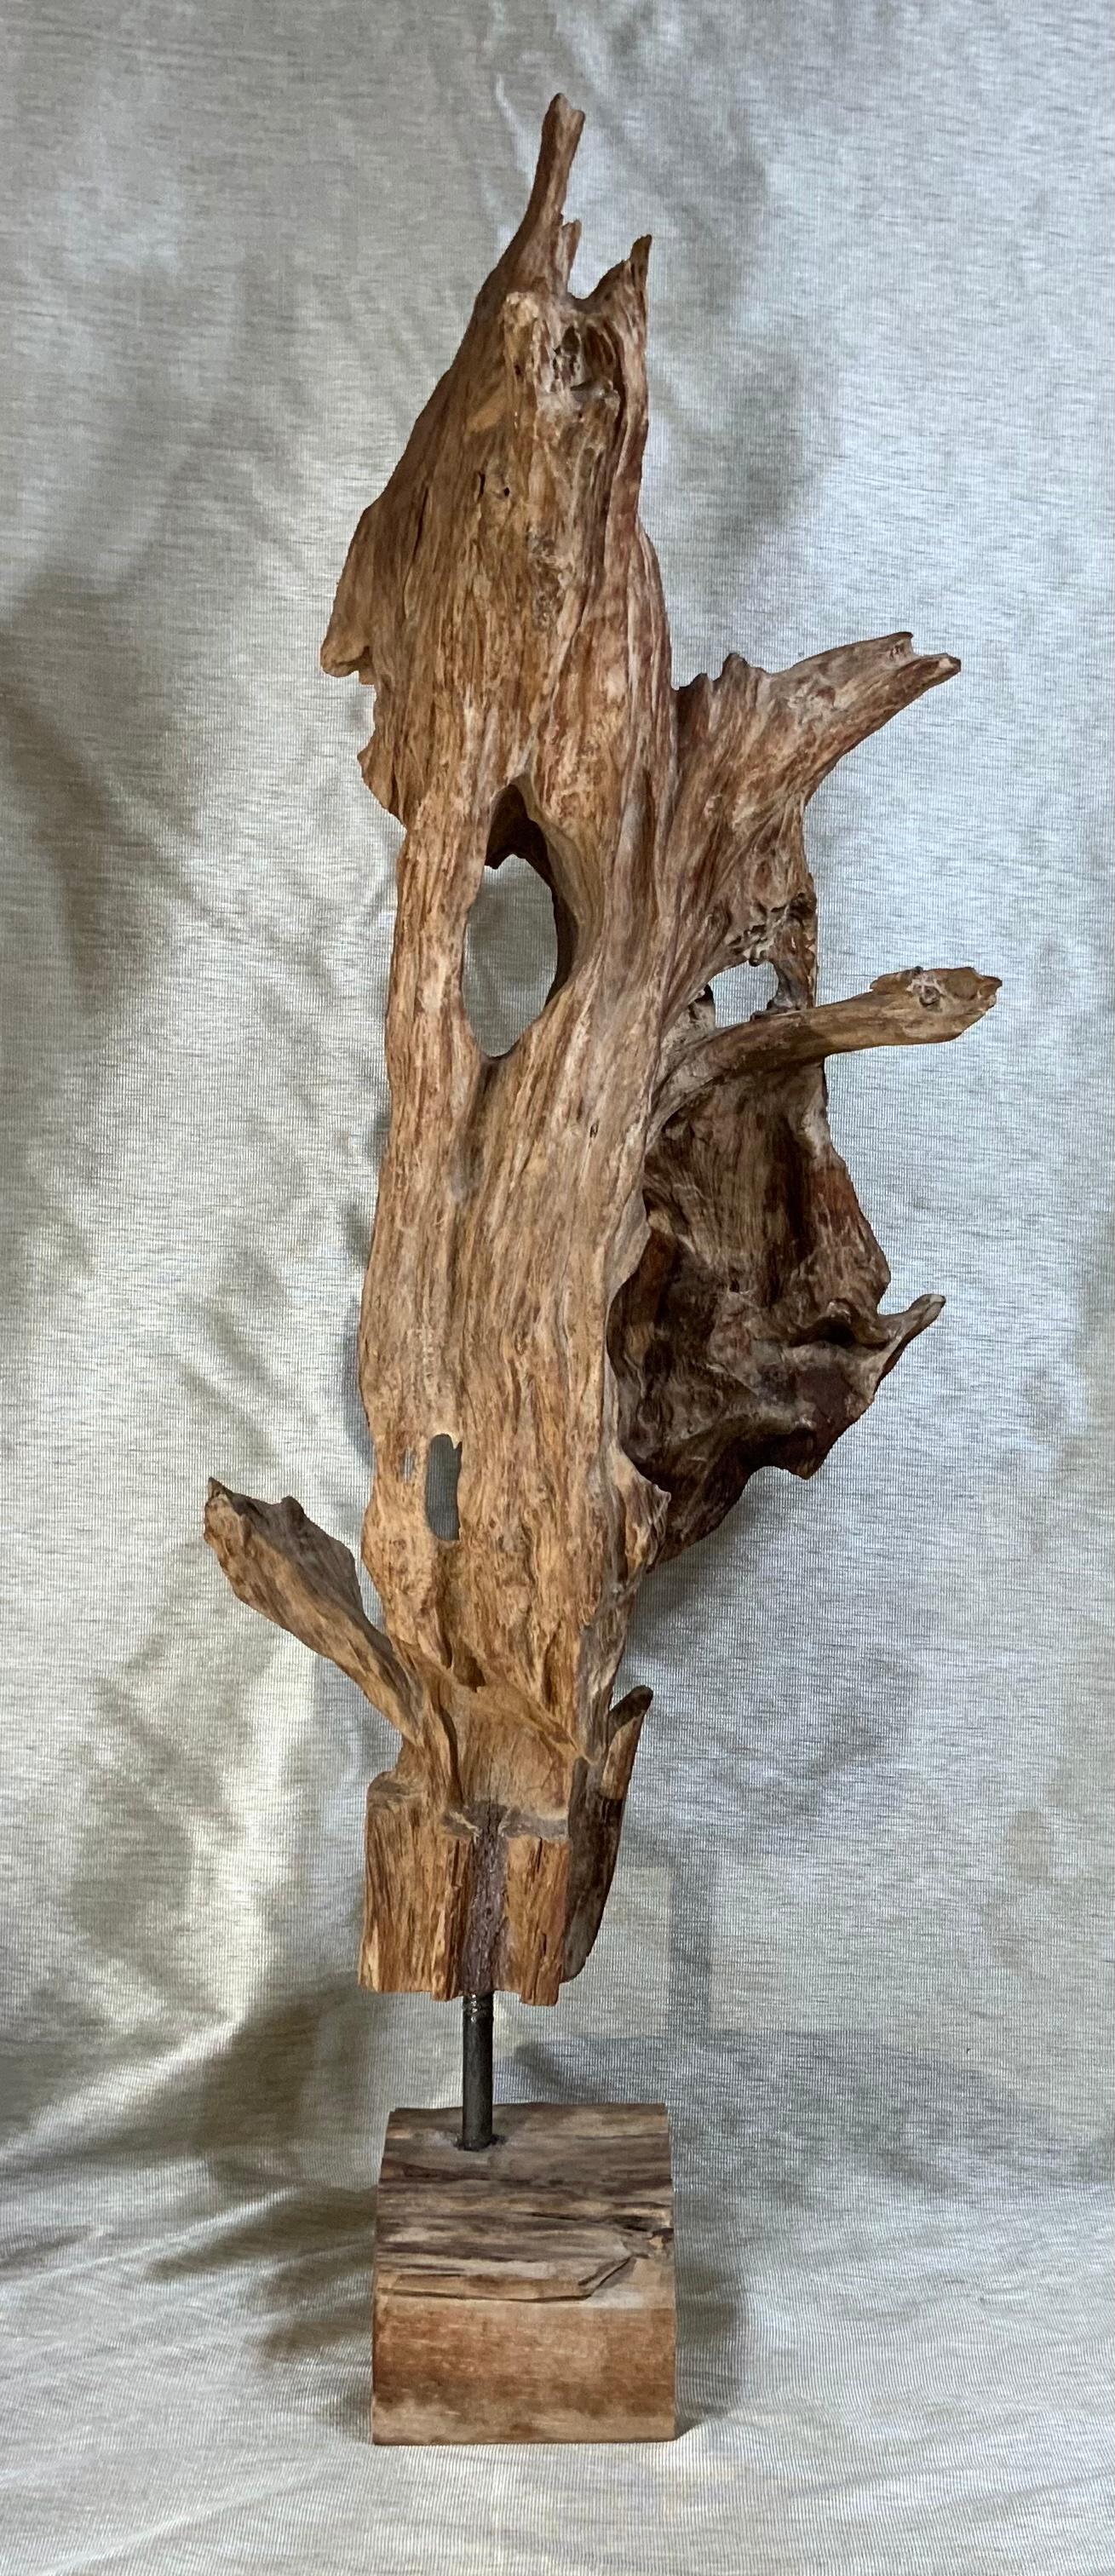 
This beautiful, carved, driftwood sculpture was made from part of single large tree. This important reclaimed tree root has a bleached natural finish and sits on a natural wood base professionally mounted with steel rod to secure it together. The